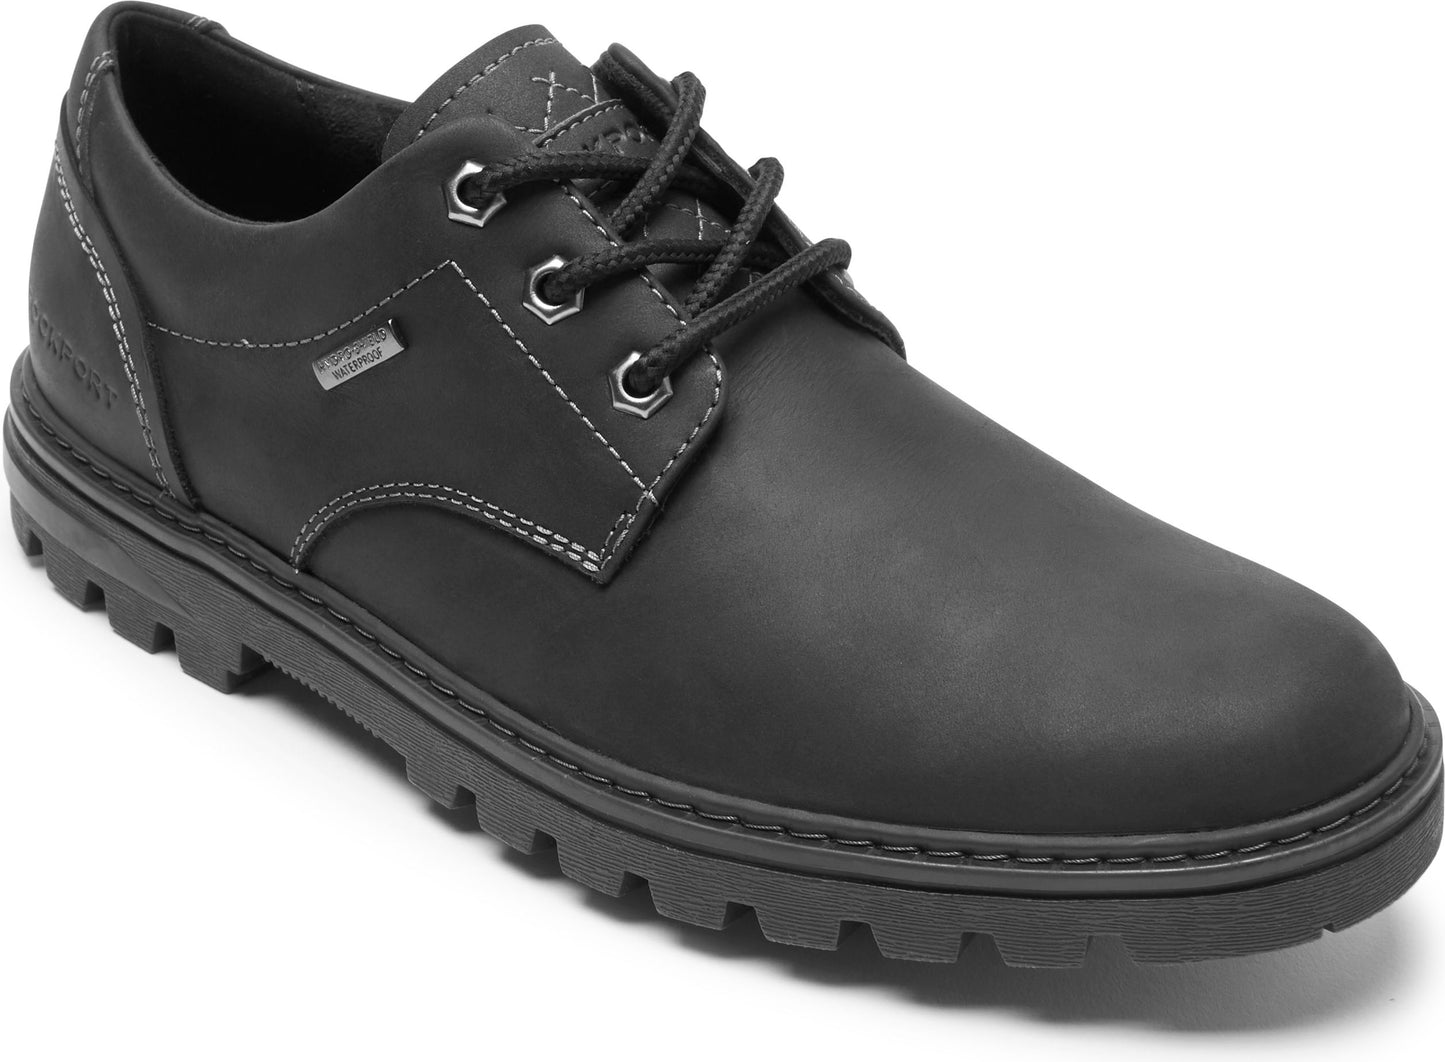 Rockport Shoes Weather Or Not Pt Ox Black